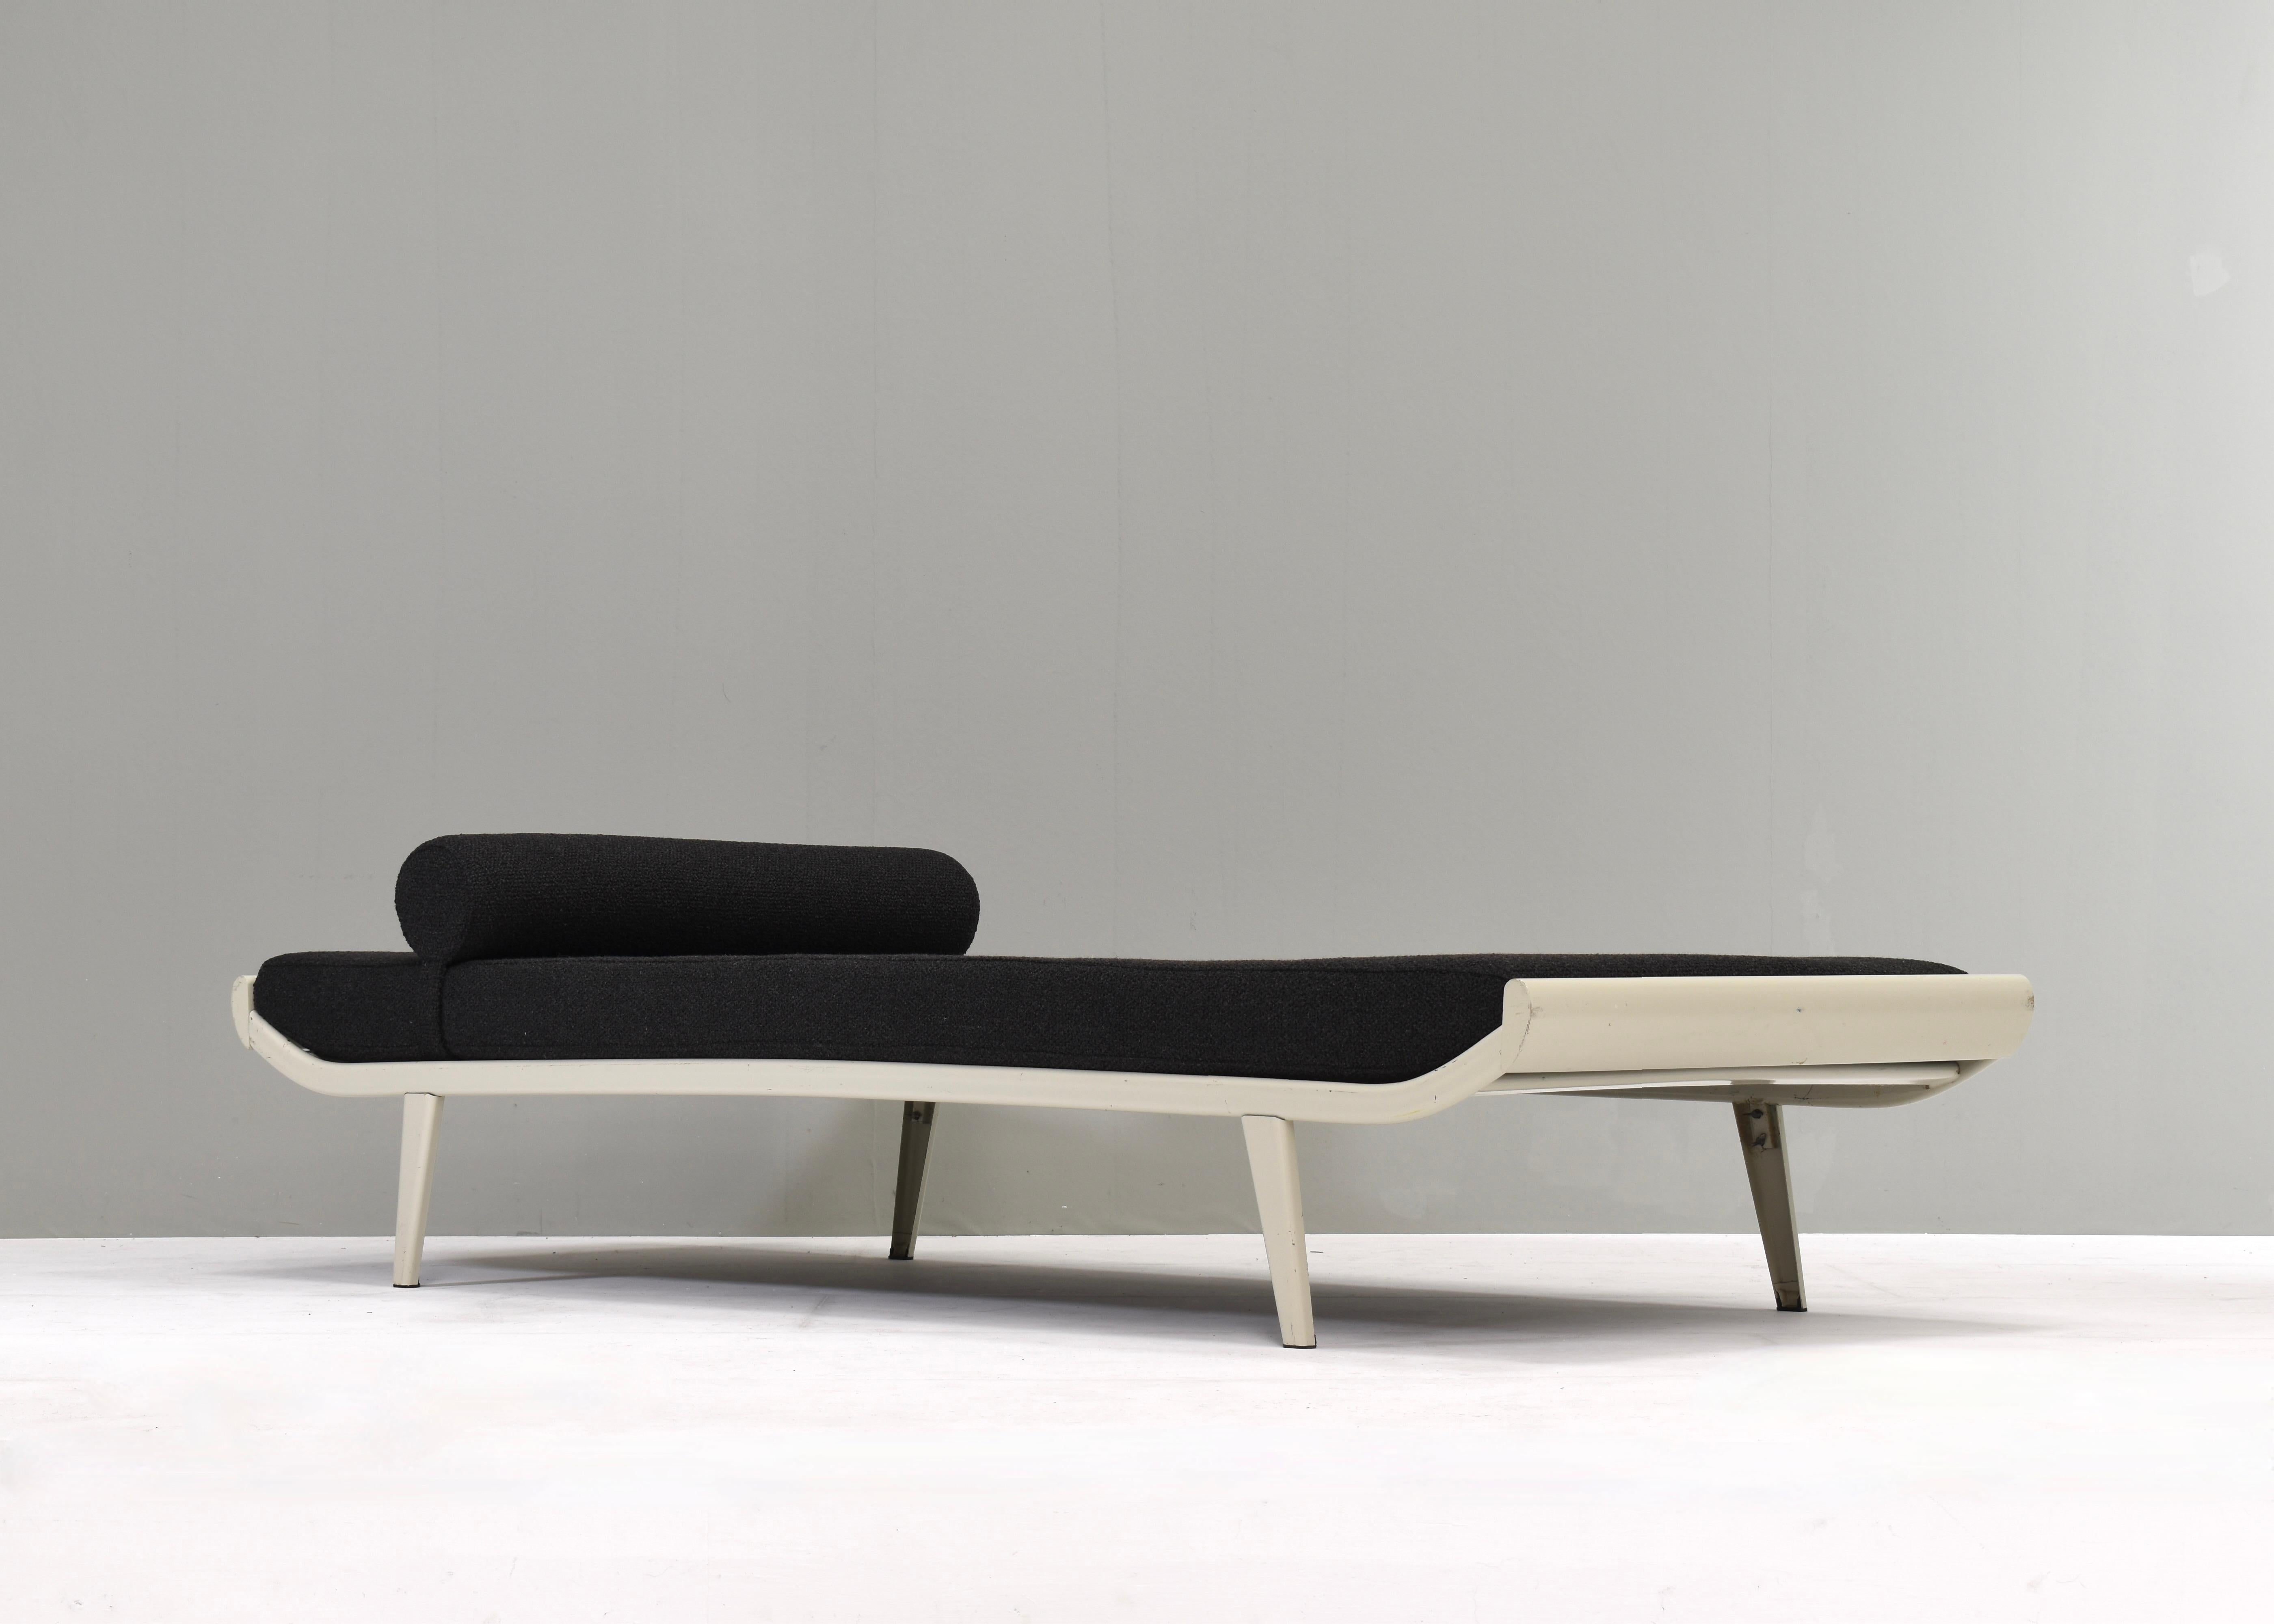 Mid-20th Century Cleopatra Daybed by Cordemeijer for Auping in New Upholstery, Netherlands, 1954